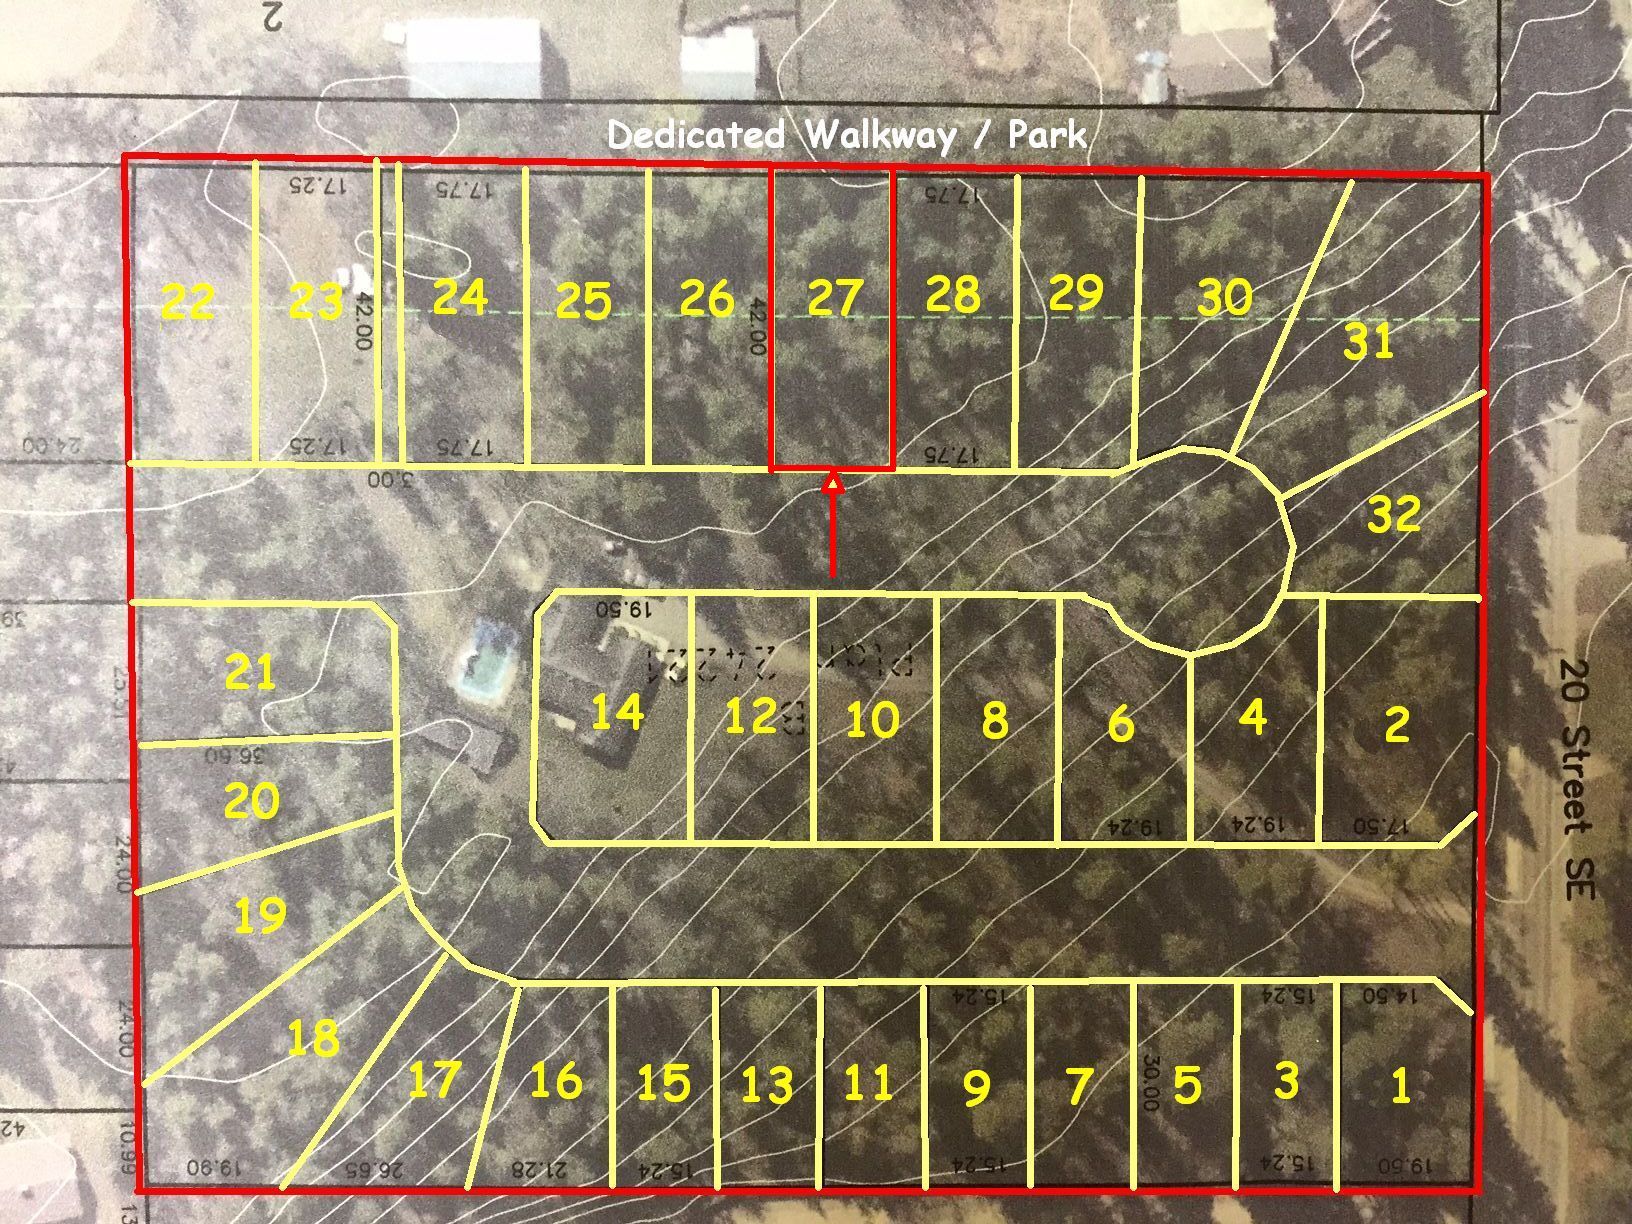 Main Photo: Lot 28 or 29 2100 Southeast 15 Avenue in Salmon Arm: HiIlcrest Vacant Land for sale (SE Salmon Arm)  : MLS®# 10154455